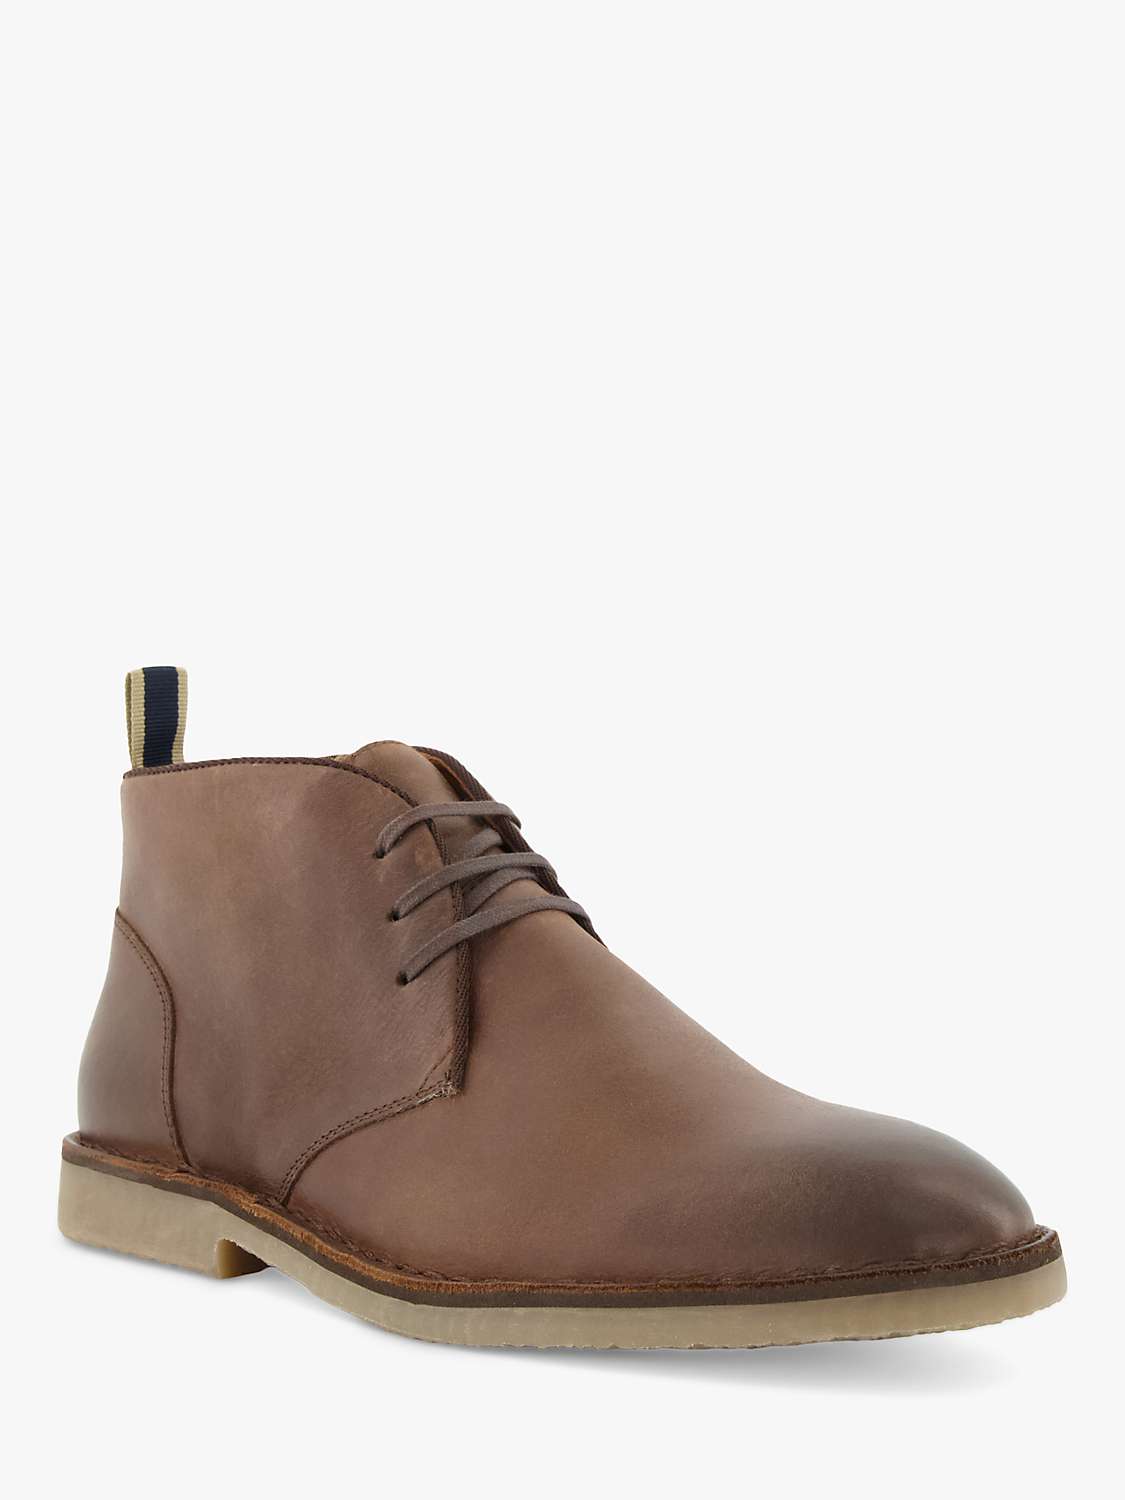 Dune Cashed Leather Casual Chukka Boots, Brown at John Lewis & Partners